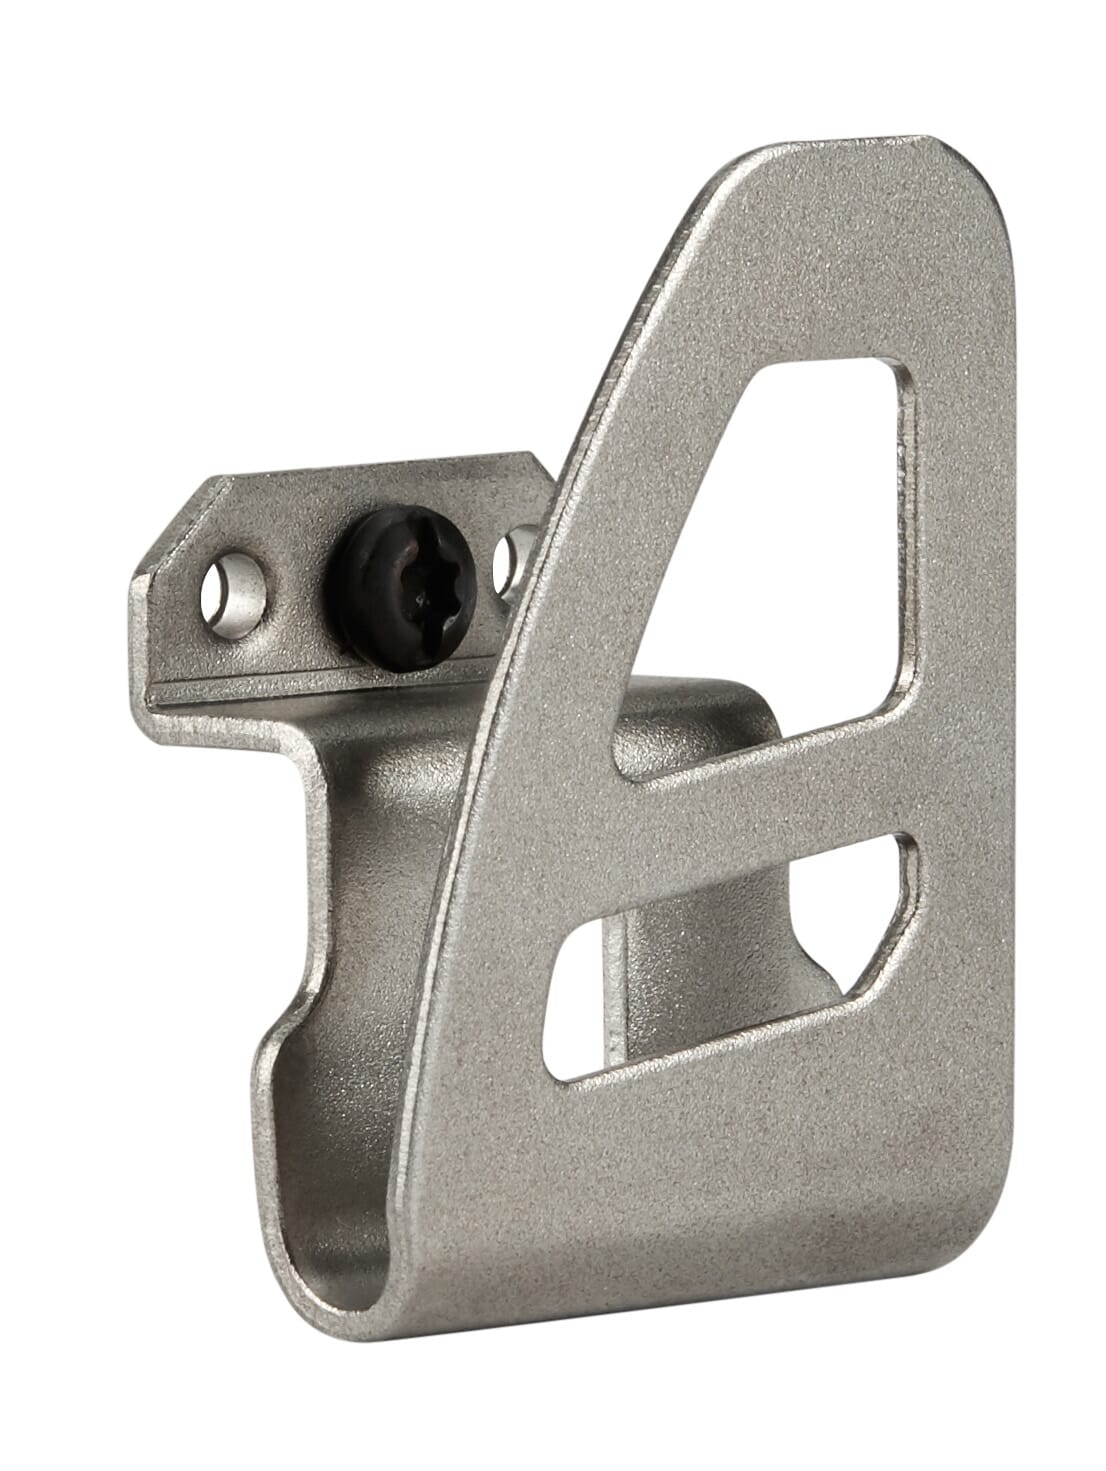 Milwaukee® 48-67-0015 Belt Clip, For Use With M18™ Cordless Drills, Impacts and Impact Wrenches